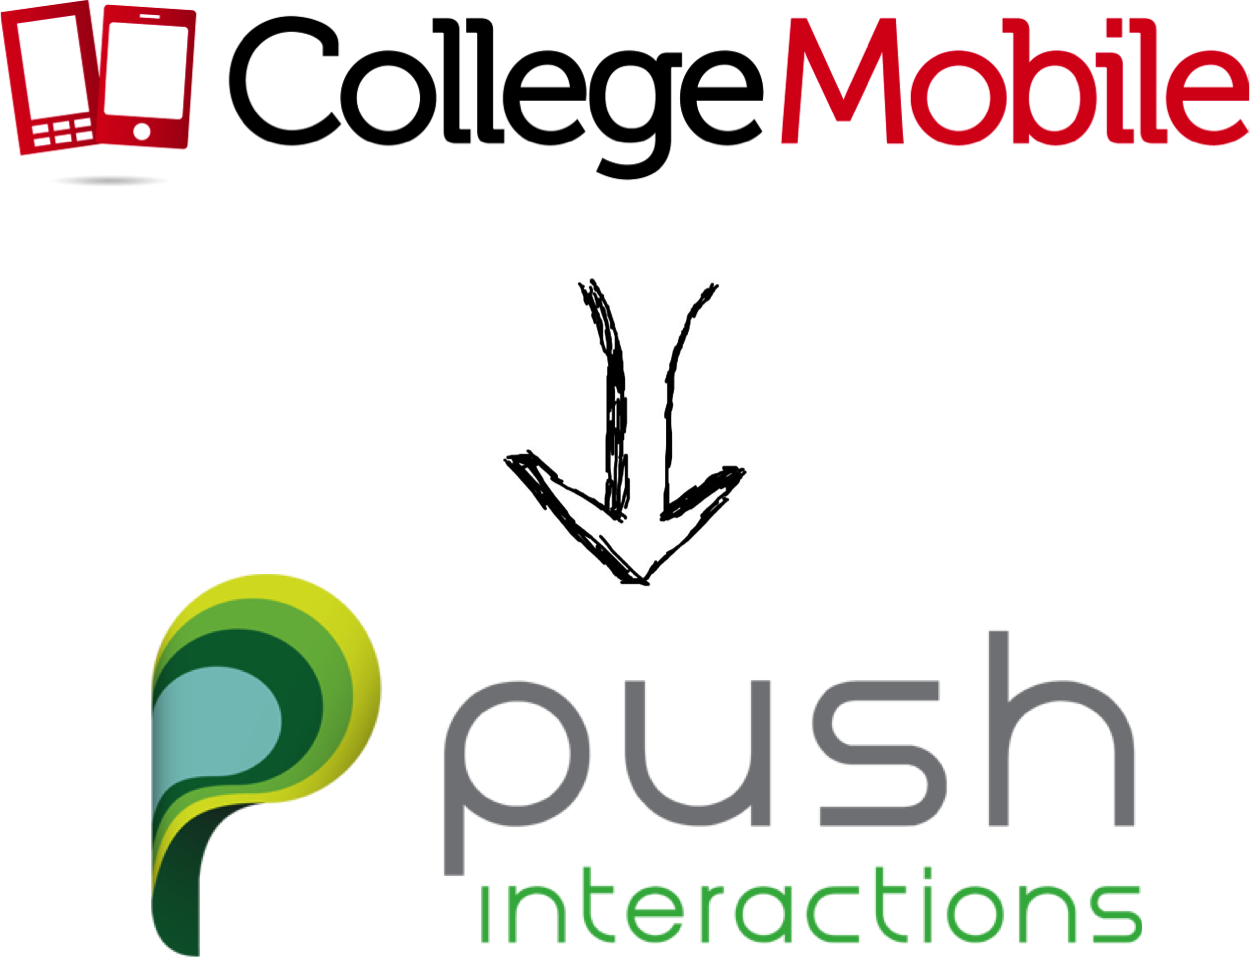 Transitioning from CollegeMobile to Push Interactions - 5 Year Anniversary Celebration